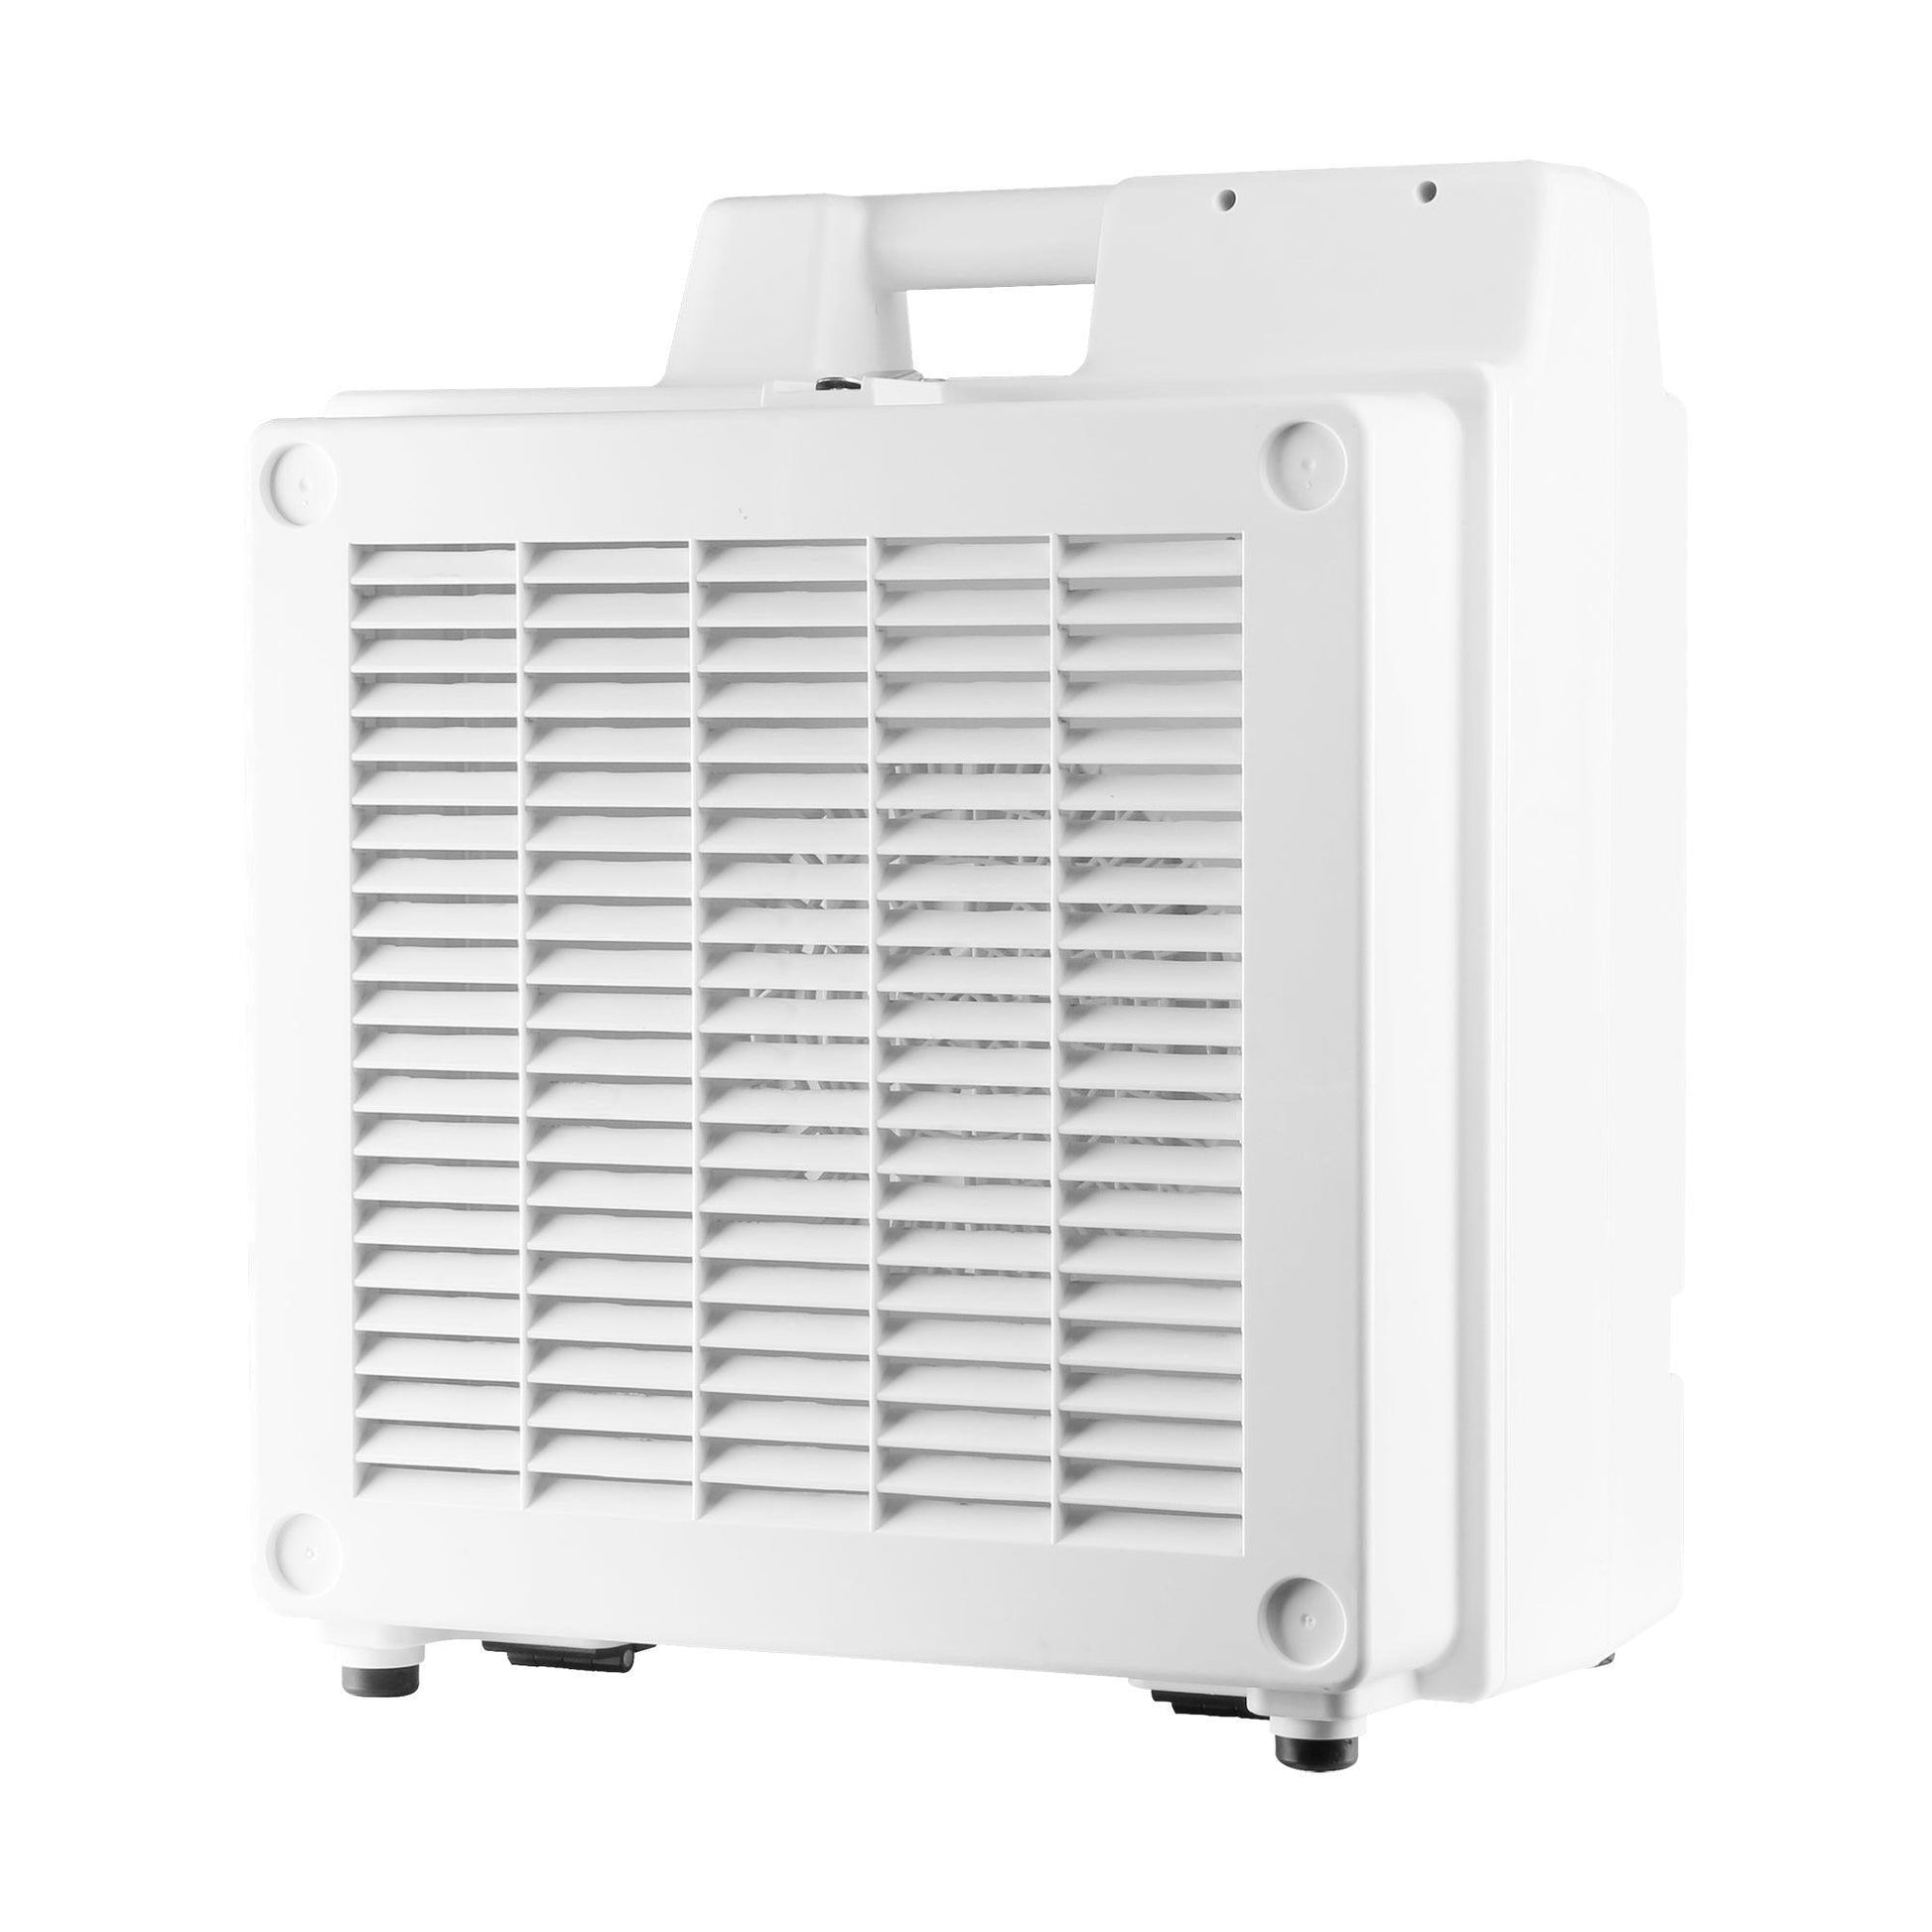 XPOWER X-3780 Professional 4 Stage Filtration HEPA Purifier System Air Scrubber - Elite Air Purifiers